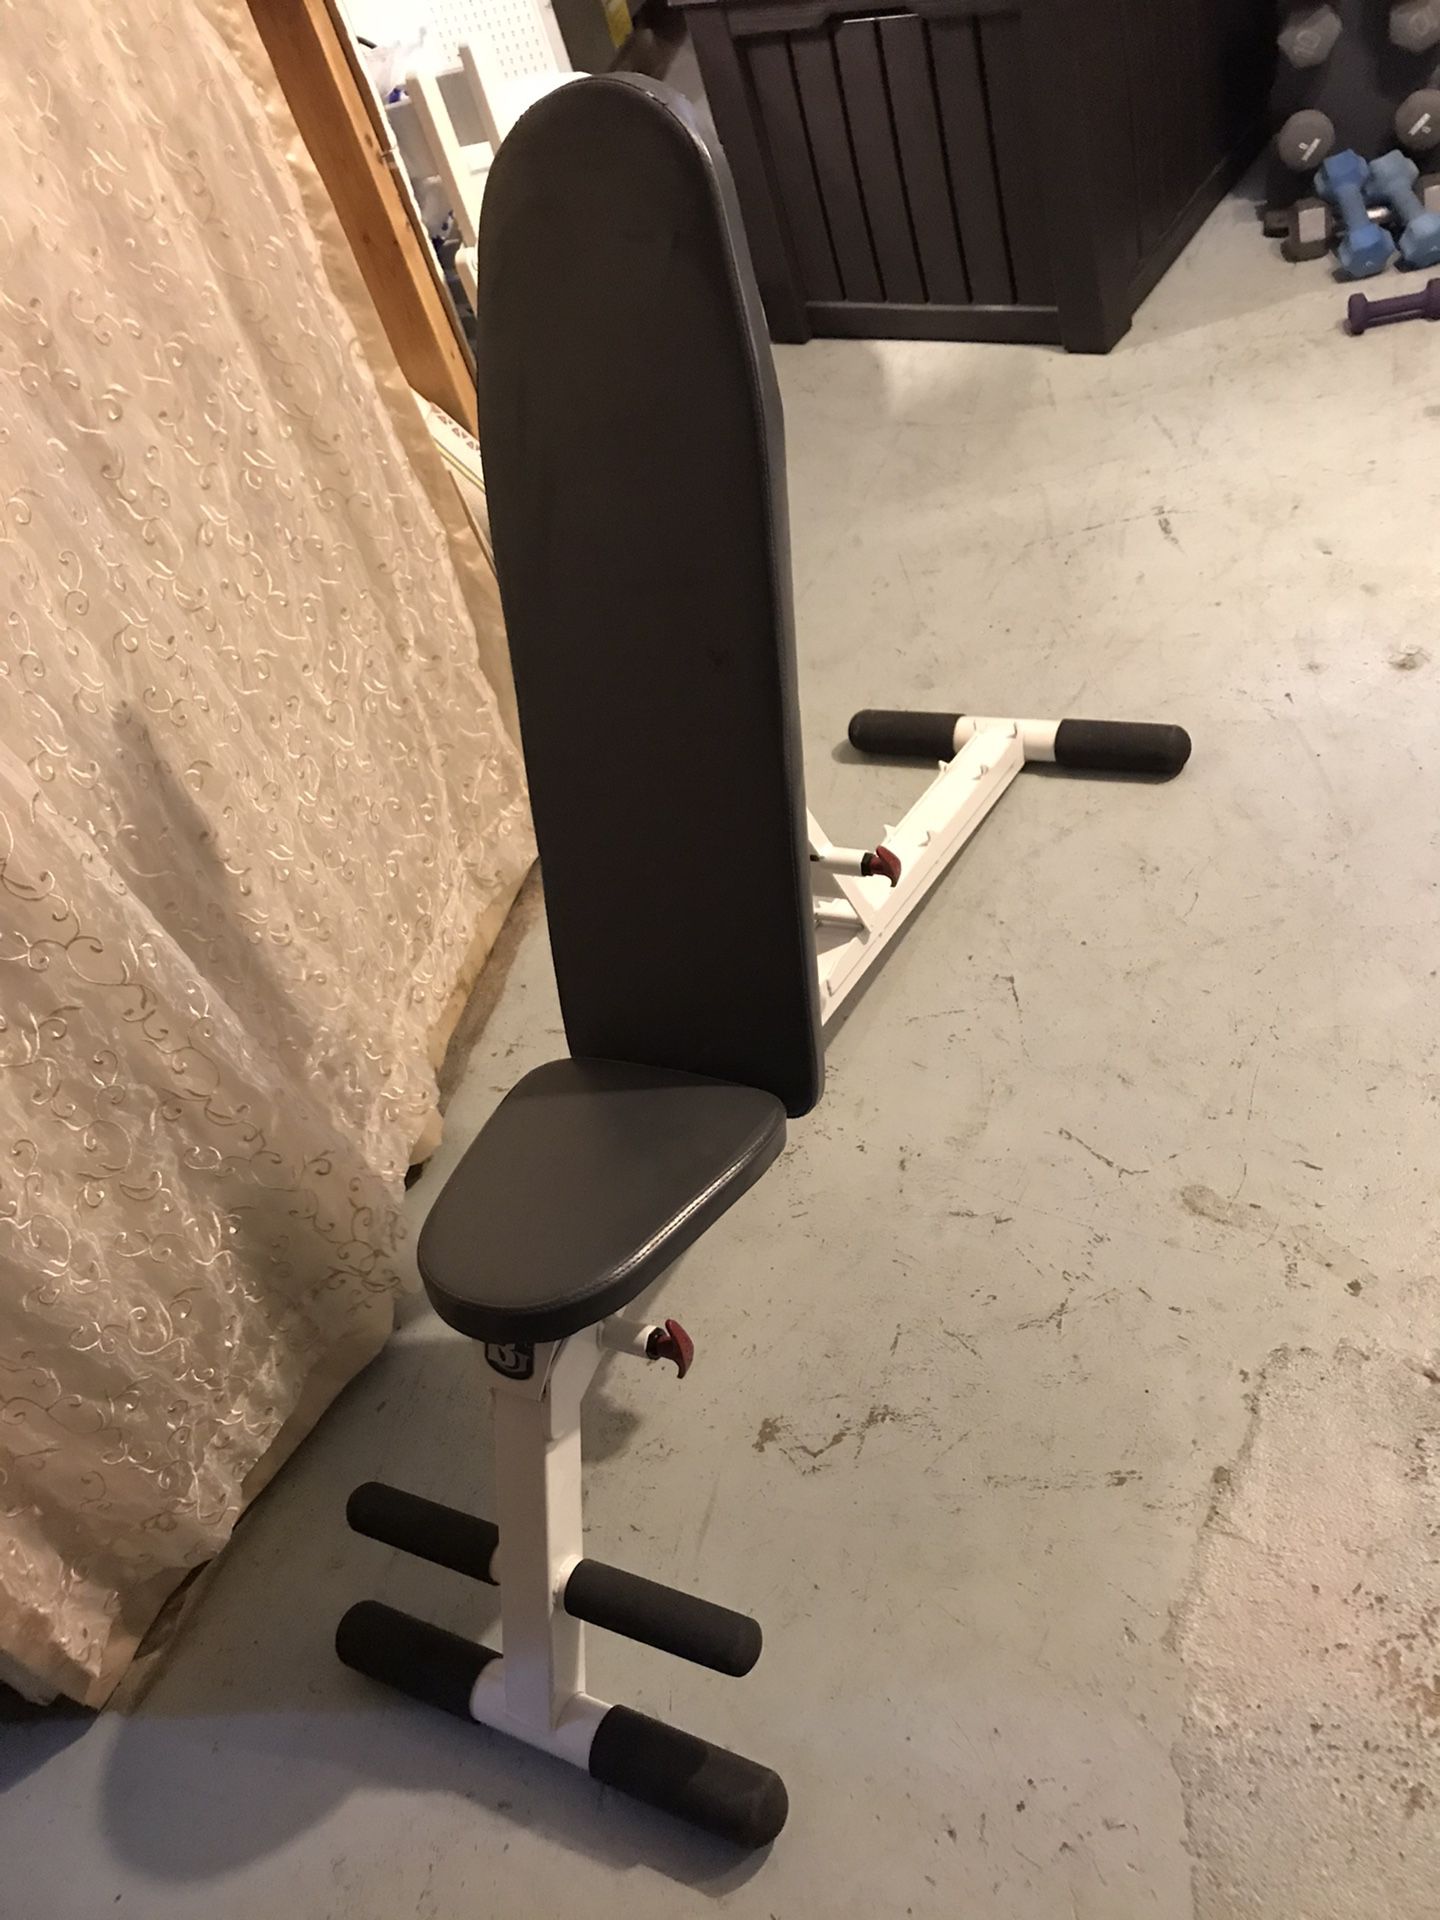 SIT UP WEIGHT BENCH ADJUSTABLE FOLD AWAY